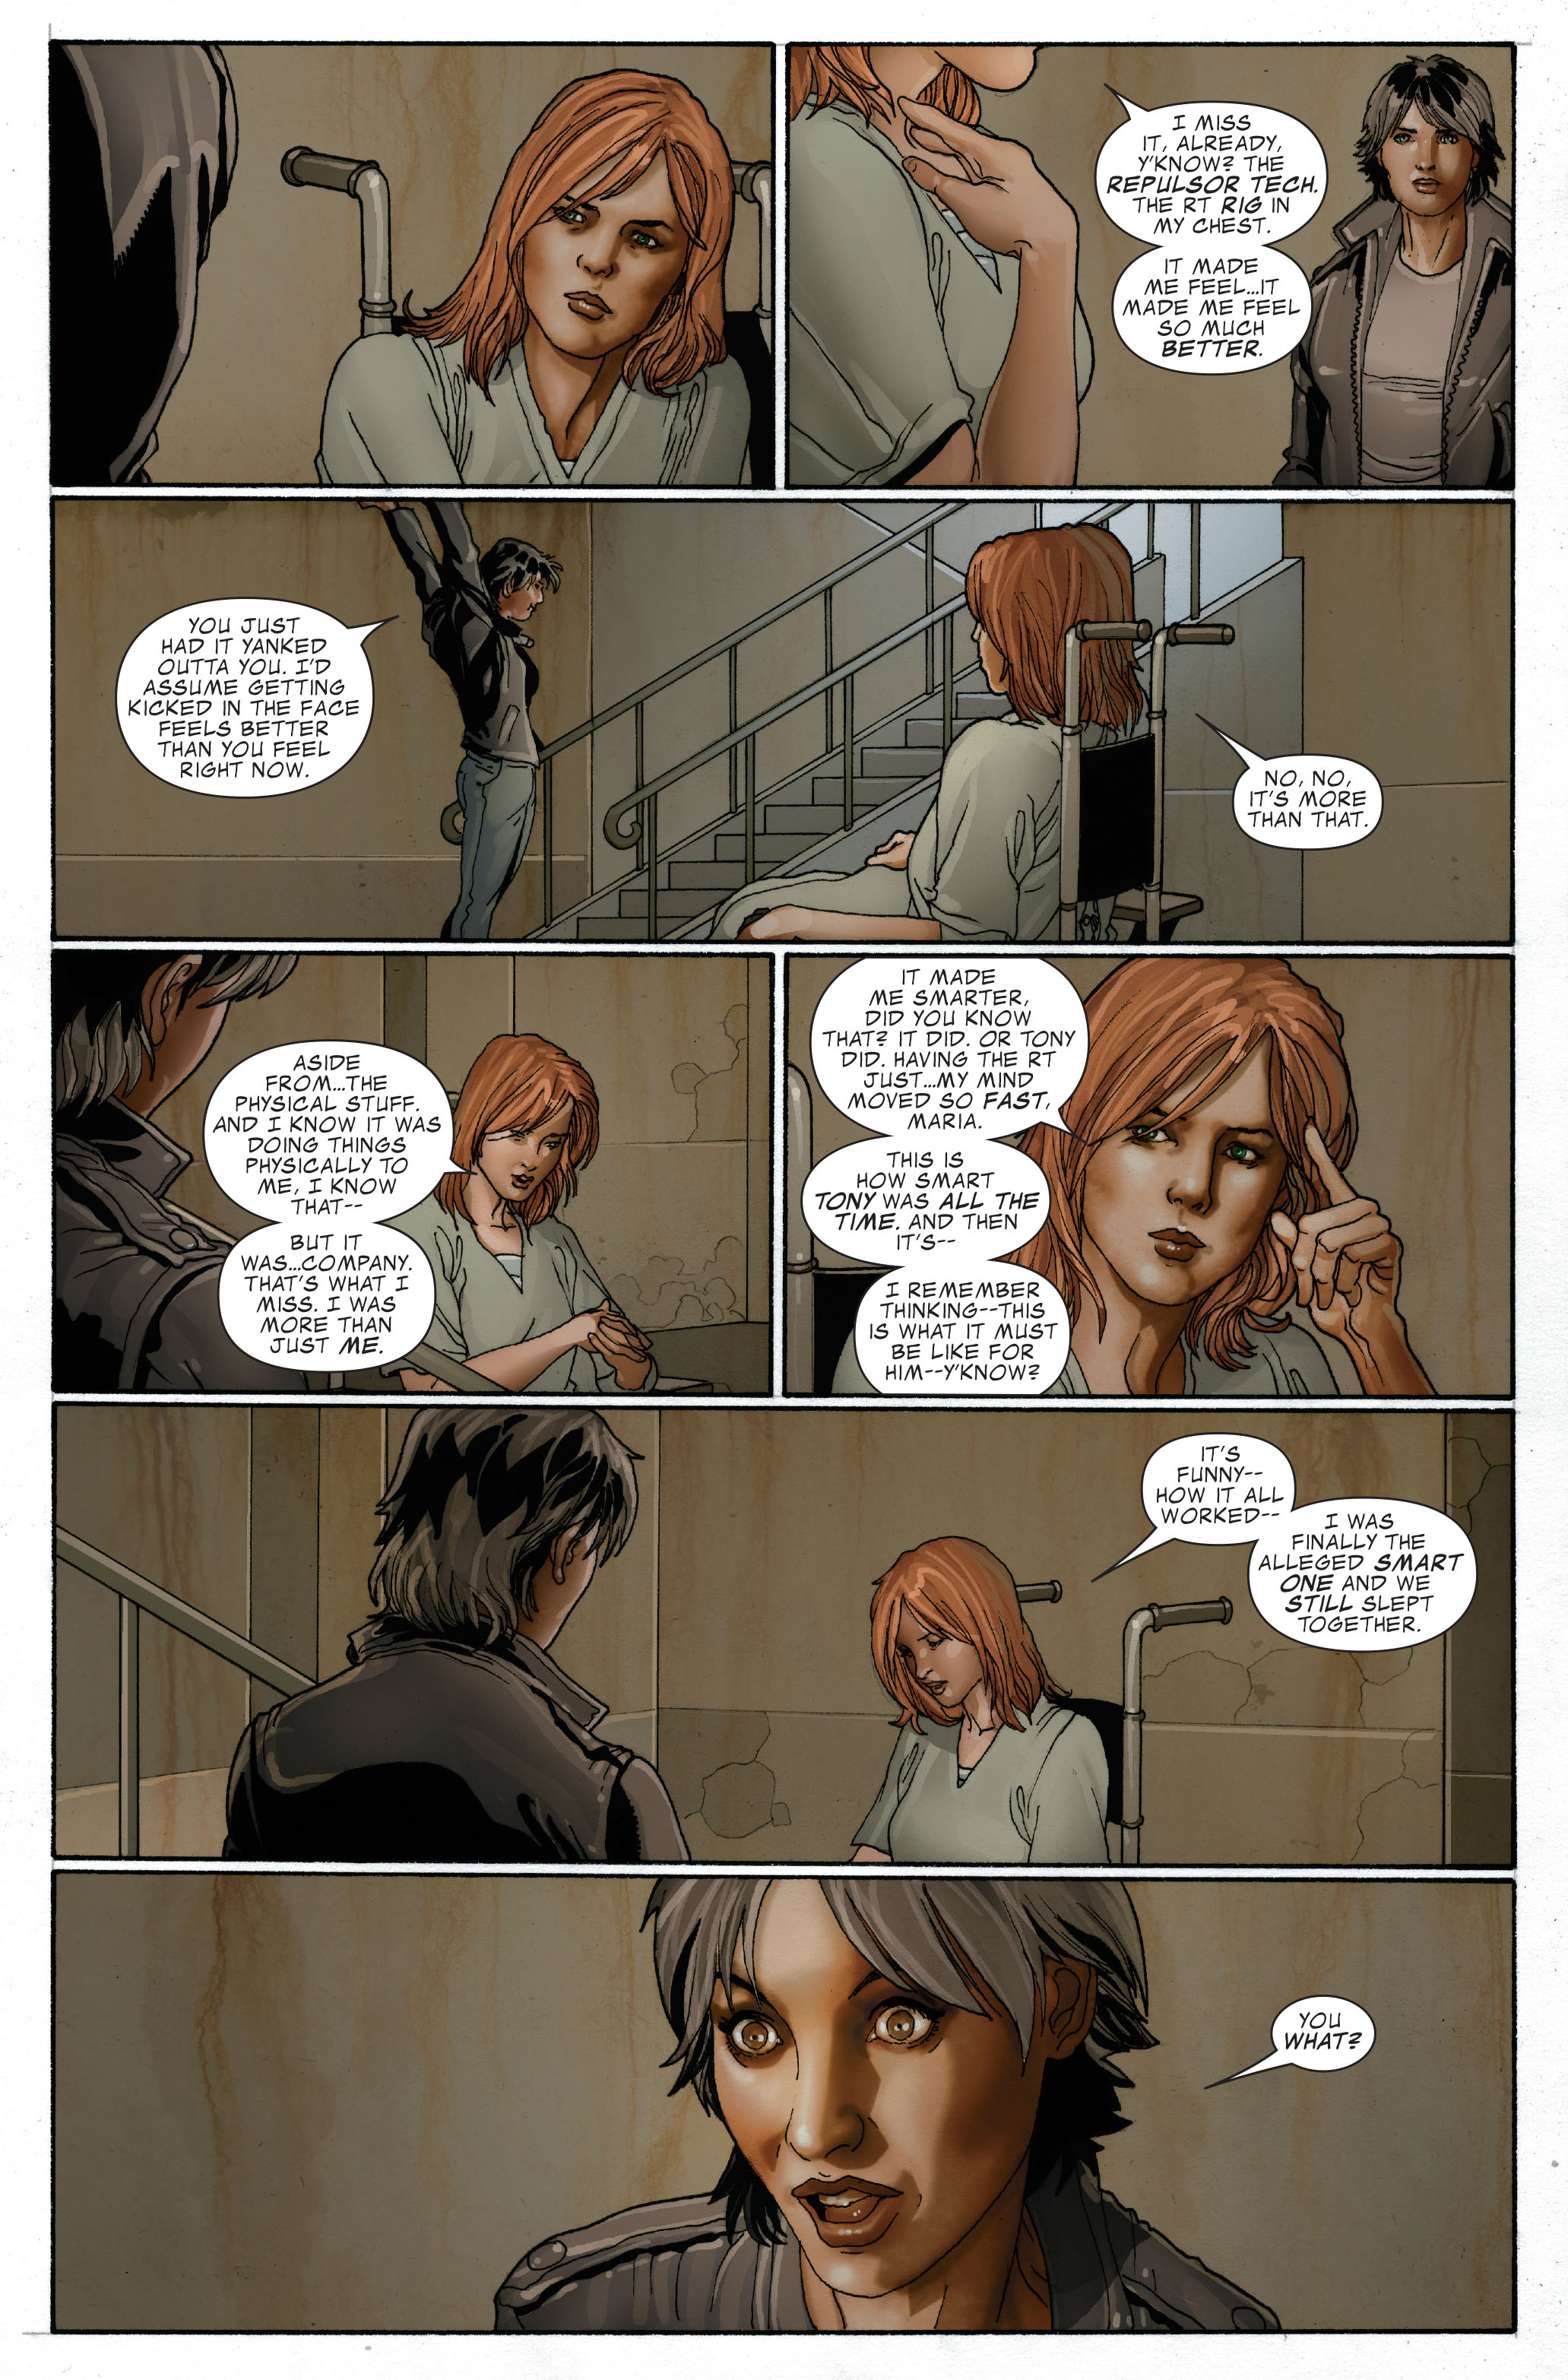 Invincible Iron Man (2008) 23 Page 6